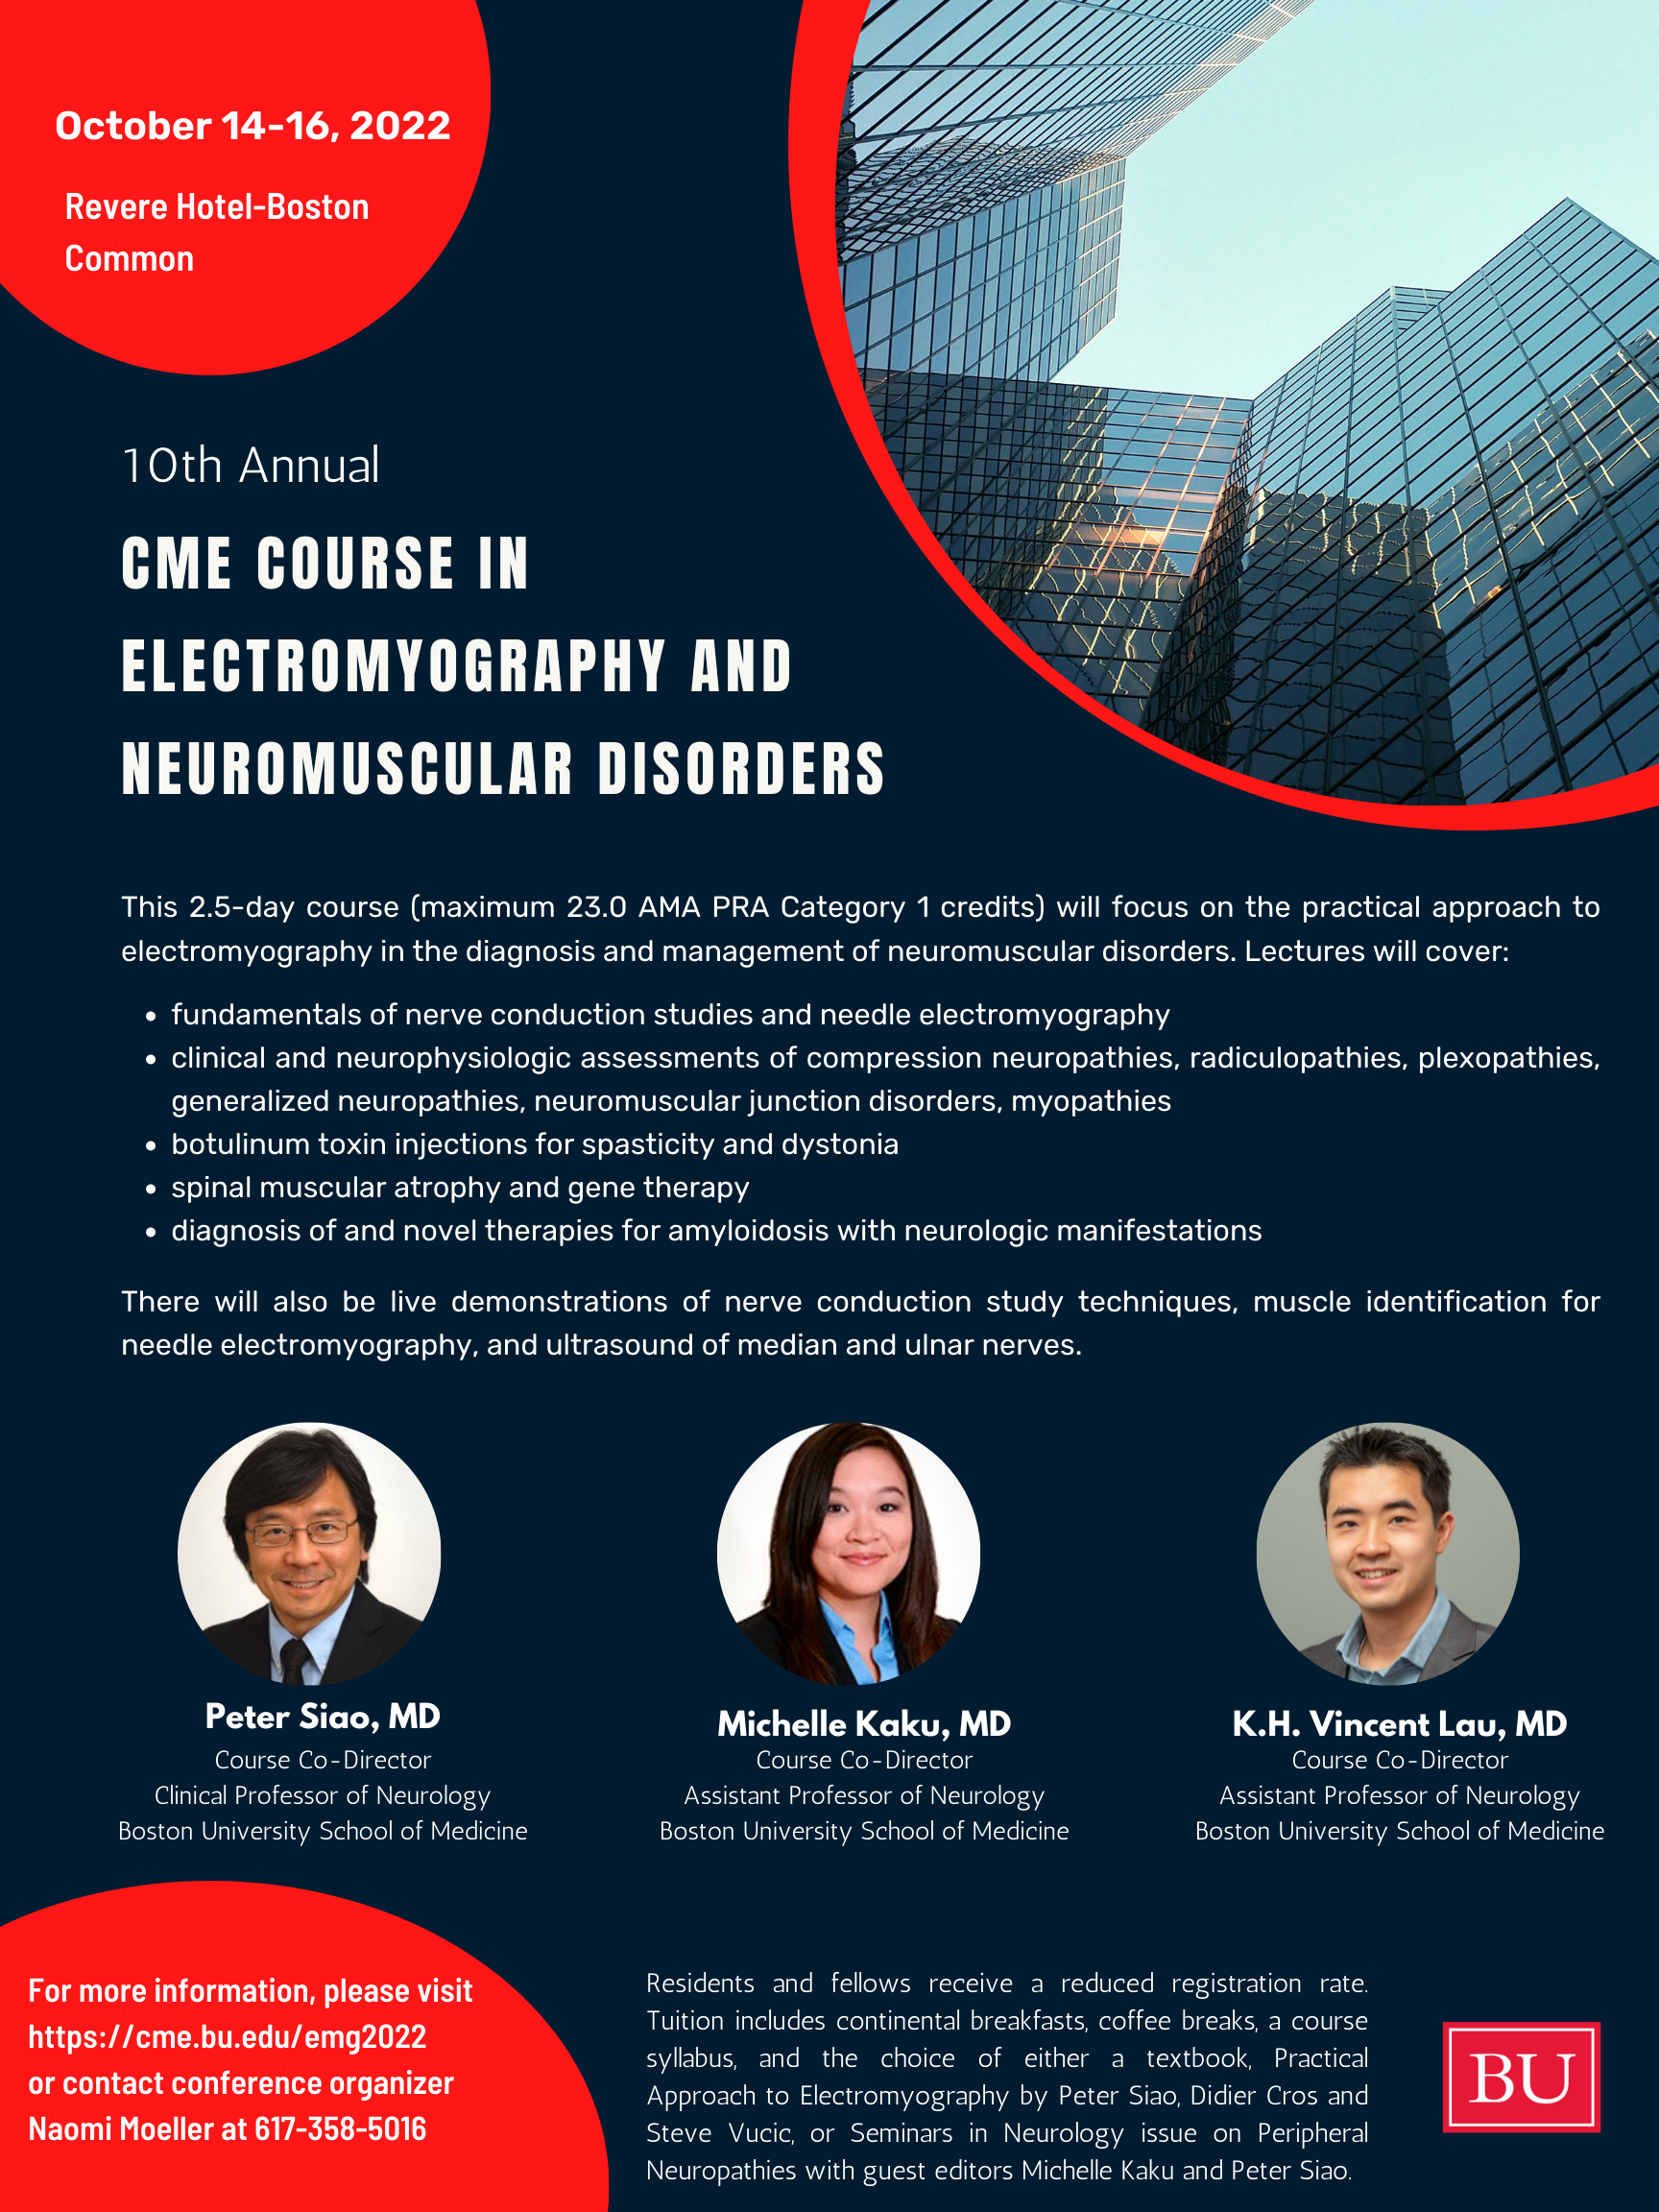 Eager for All the Latest in Electrophysiology? This CME Summit's